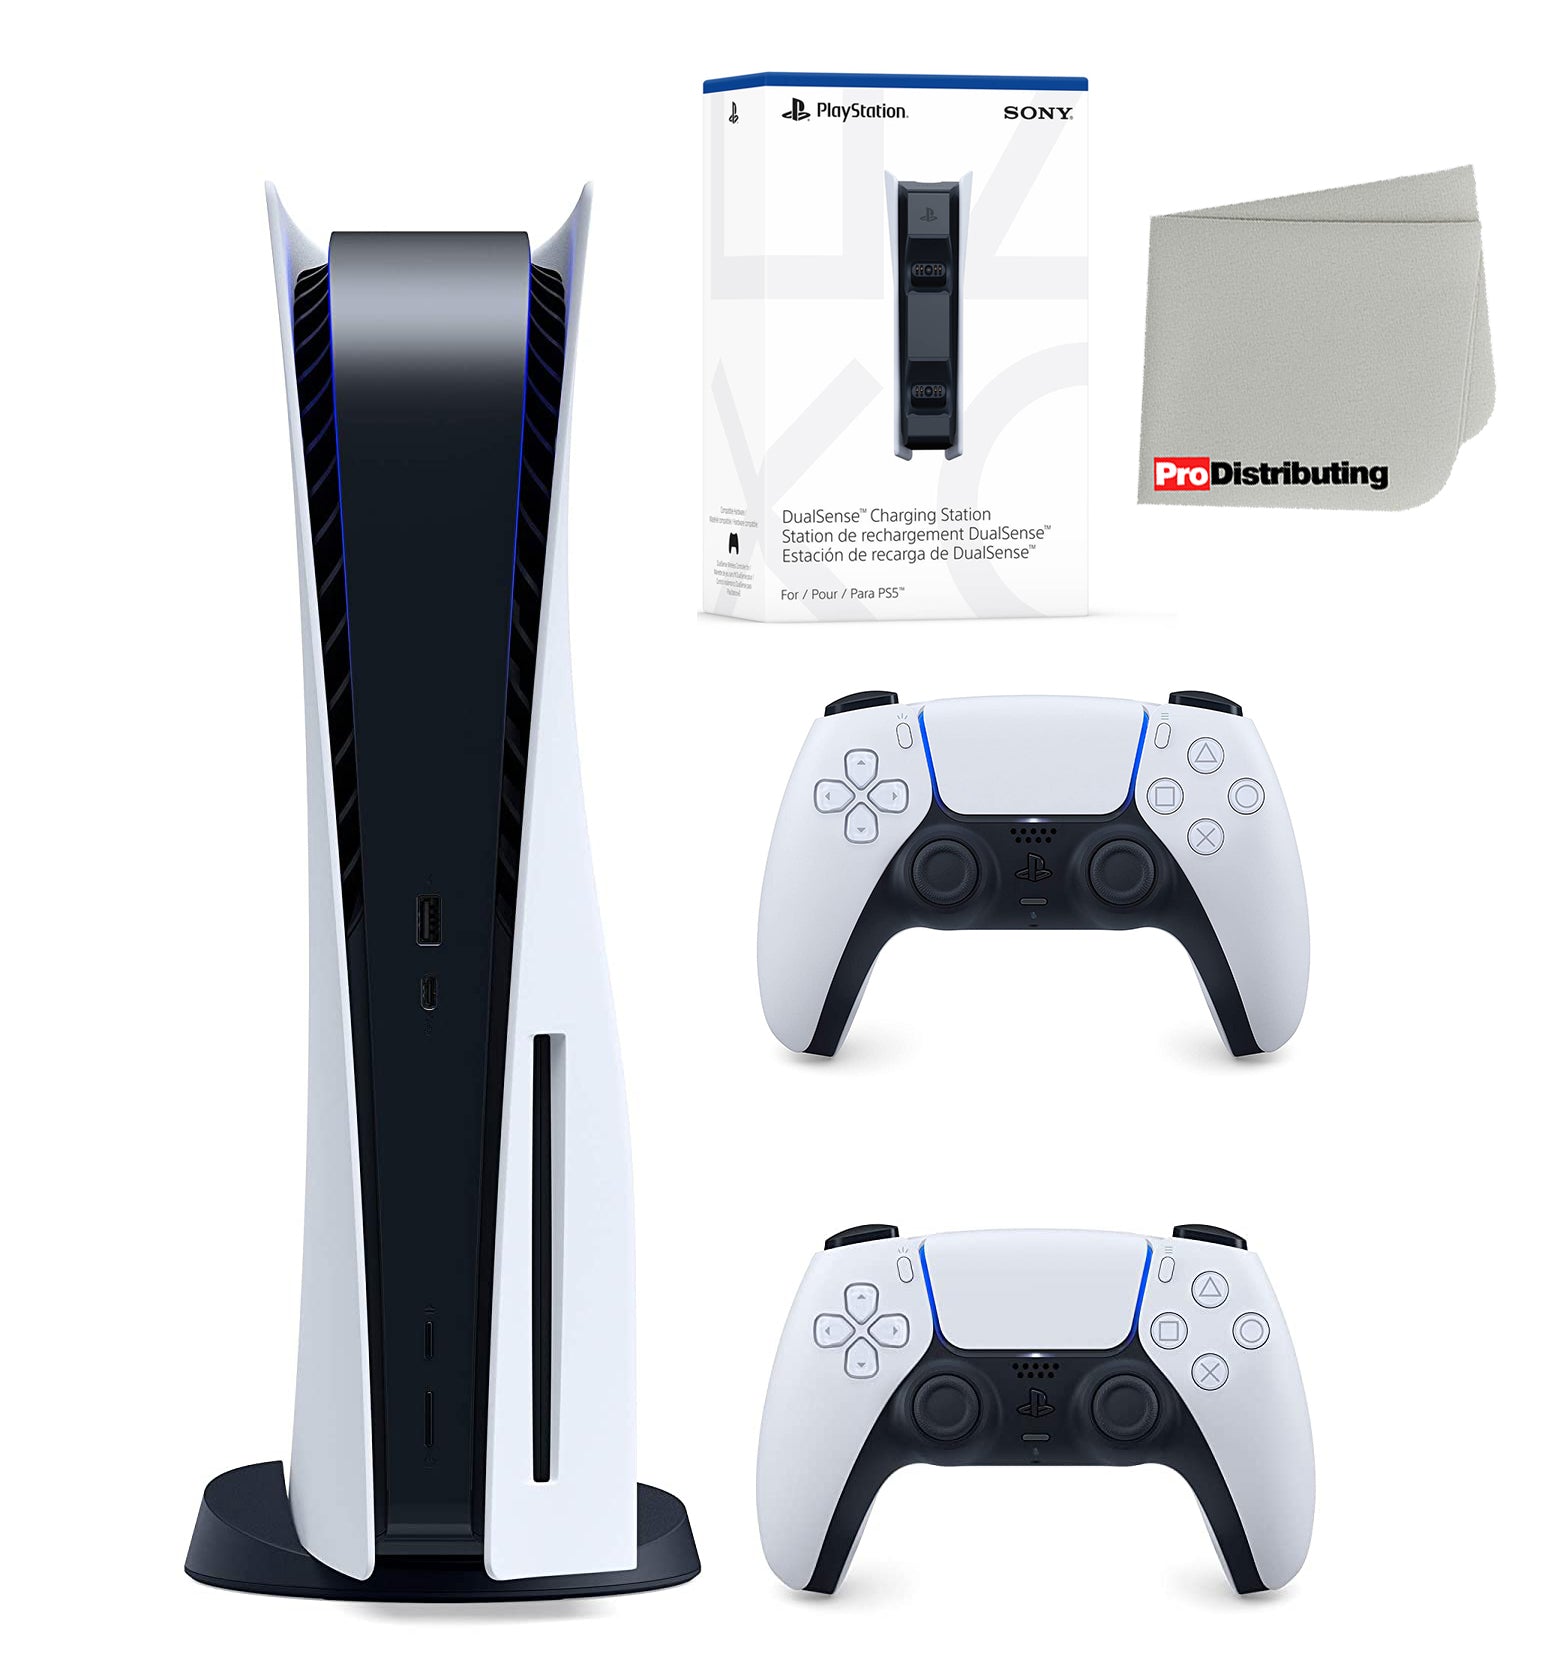 Sony Playstation 5 Disc Version with Extra DualSense Controller, Charging Station and Microfiber Cleaning Cloth - Pro-Distributing